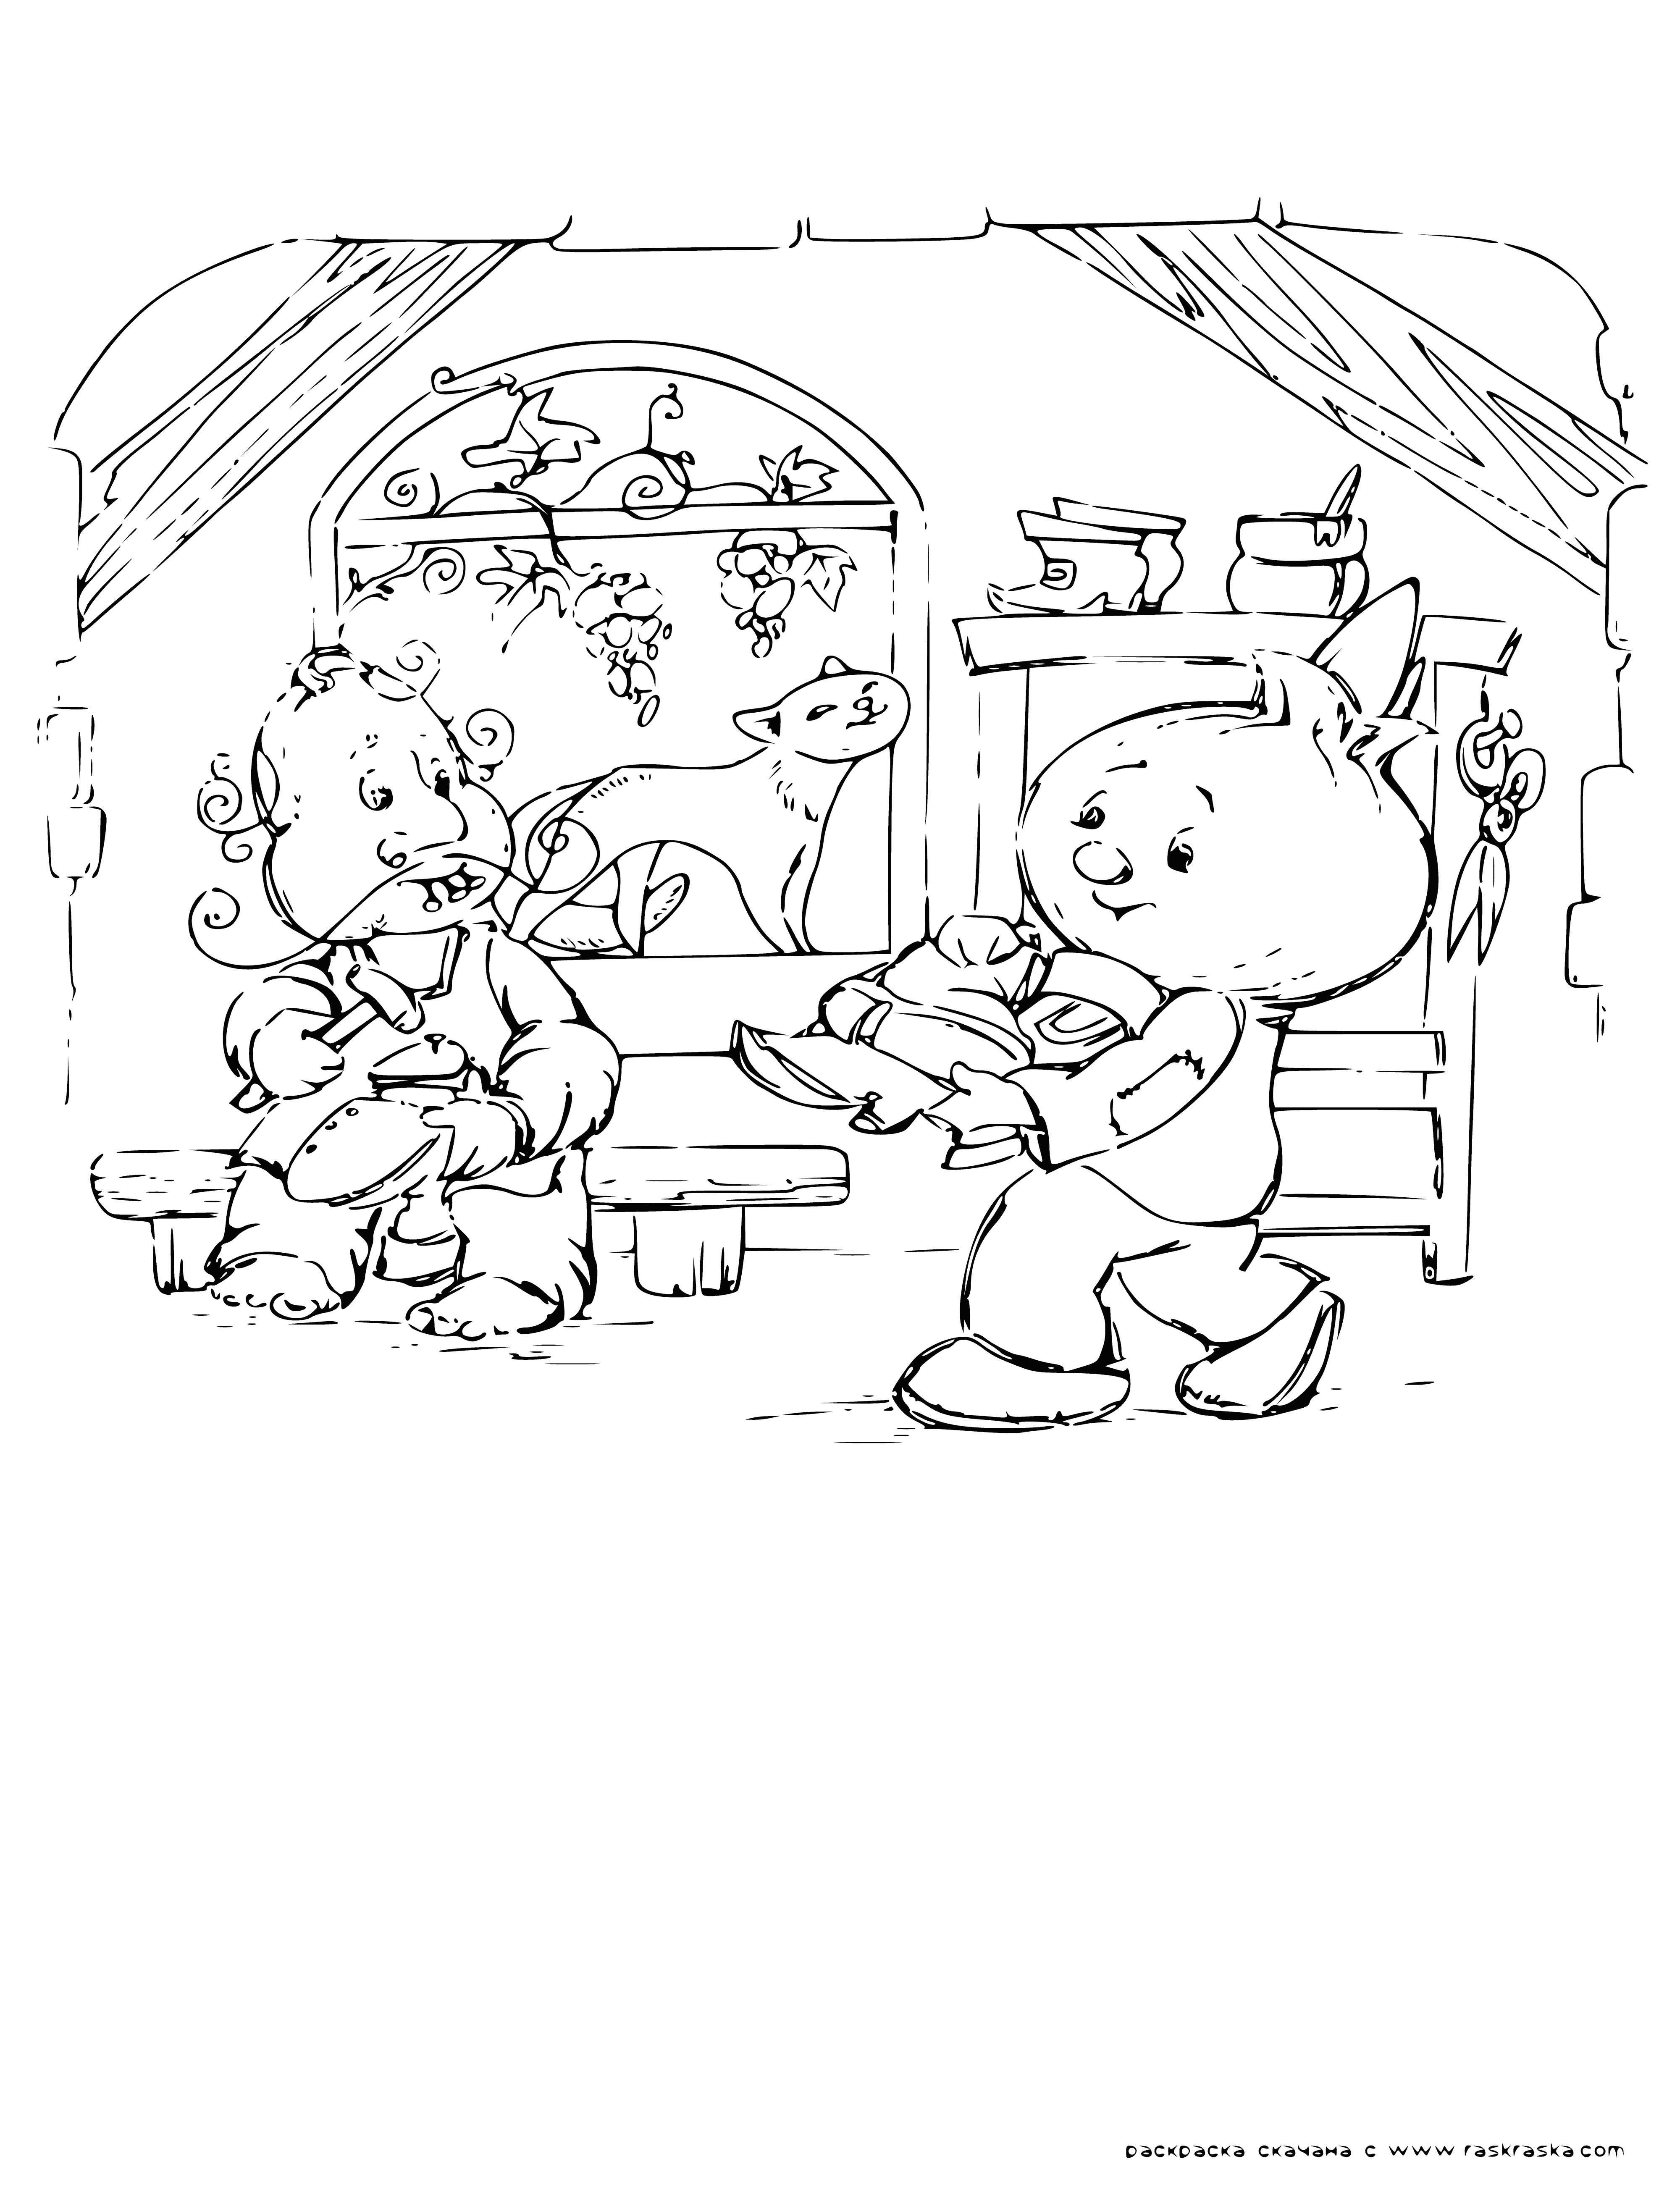 coloring page: Chipollino and shoemaker sit on bench; Chipollino with rock, shoemaker with hammer.